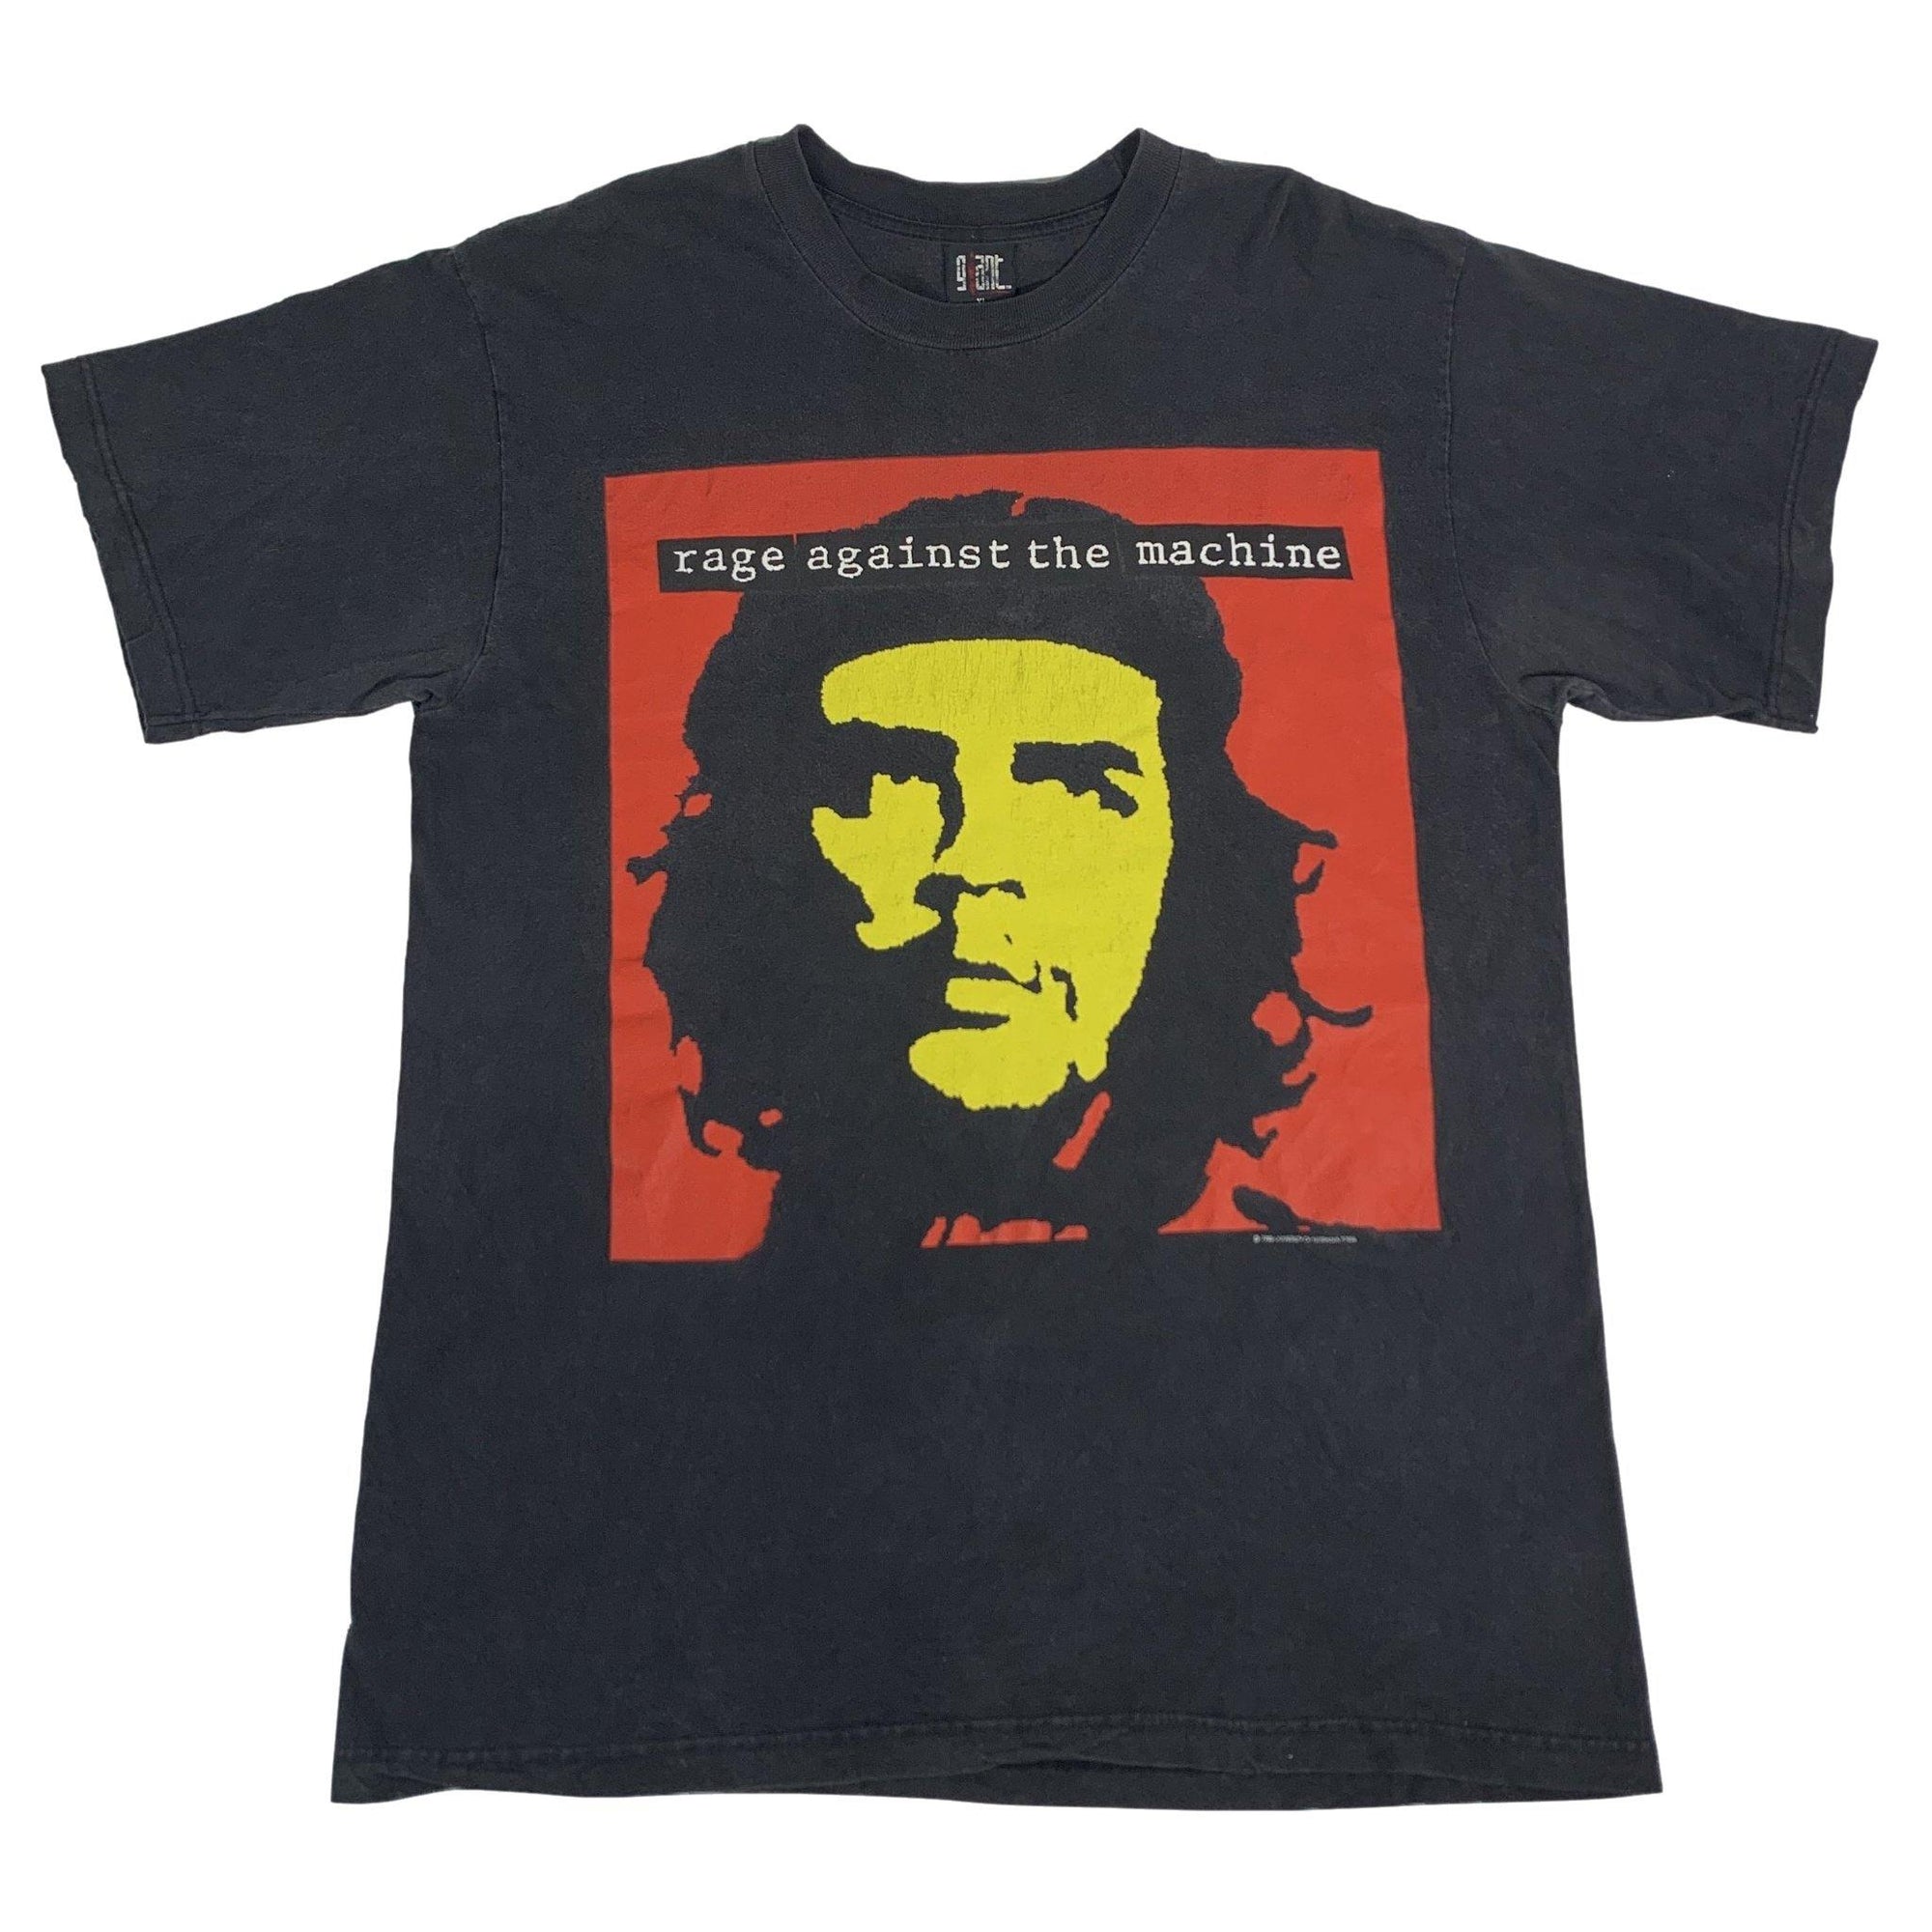 Vintage Rage Against The Machine "Che" T-Shirt - jointcustodydc